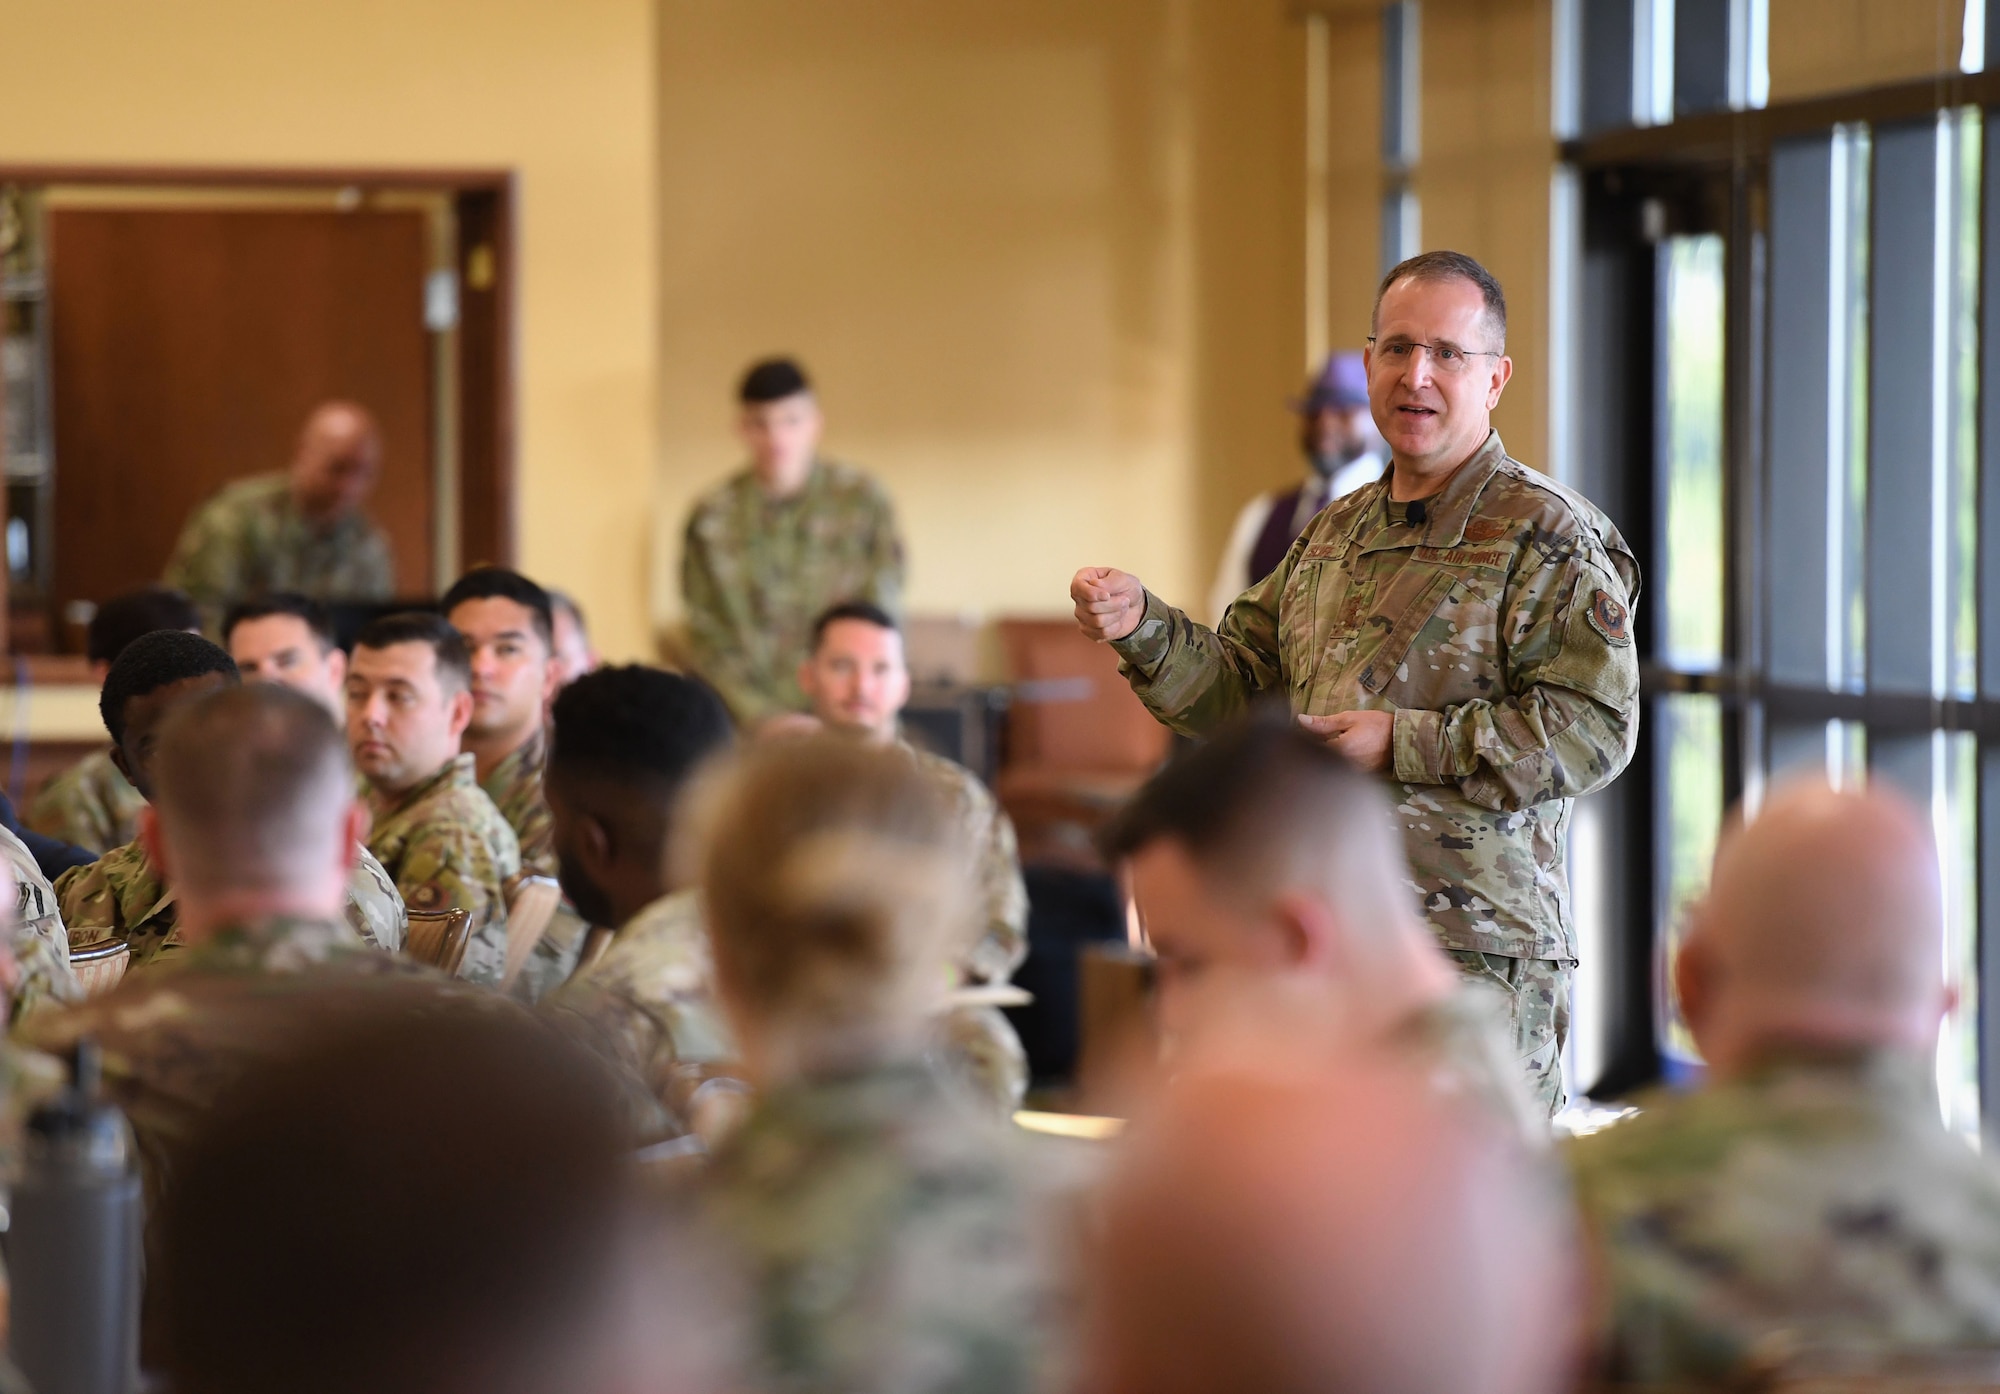 Lt. Gen. Jim Slife, commander of Air Force Special Operations Command briefs Airmen from both Air Education and Training Command and AFSOC during the inaugural Torch and Dagger professional development seminar at Keesler Air Force Base, Mississippi, Oct. 13, 2022.